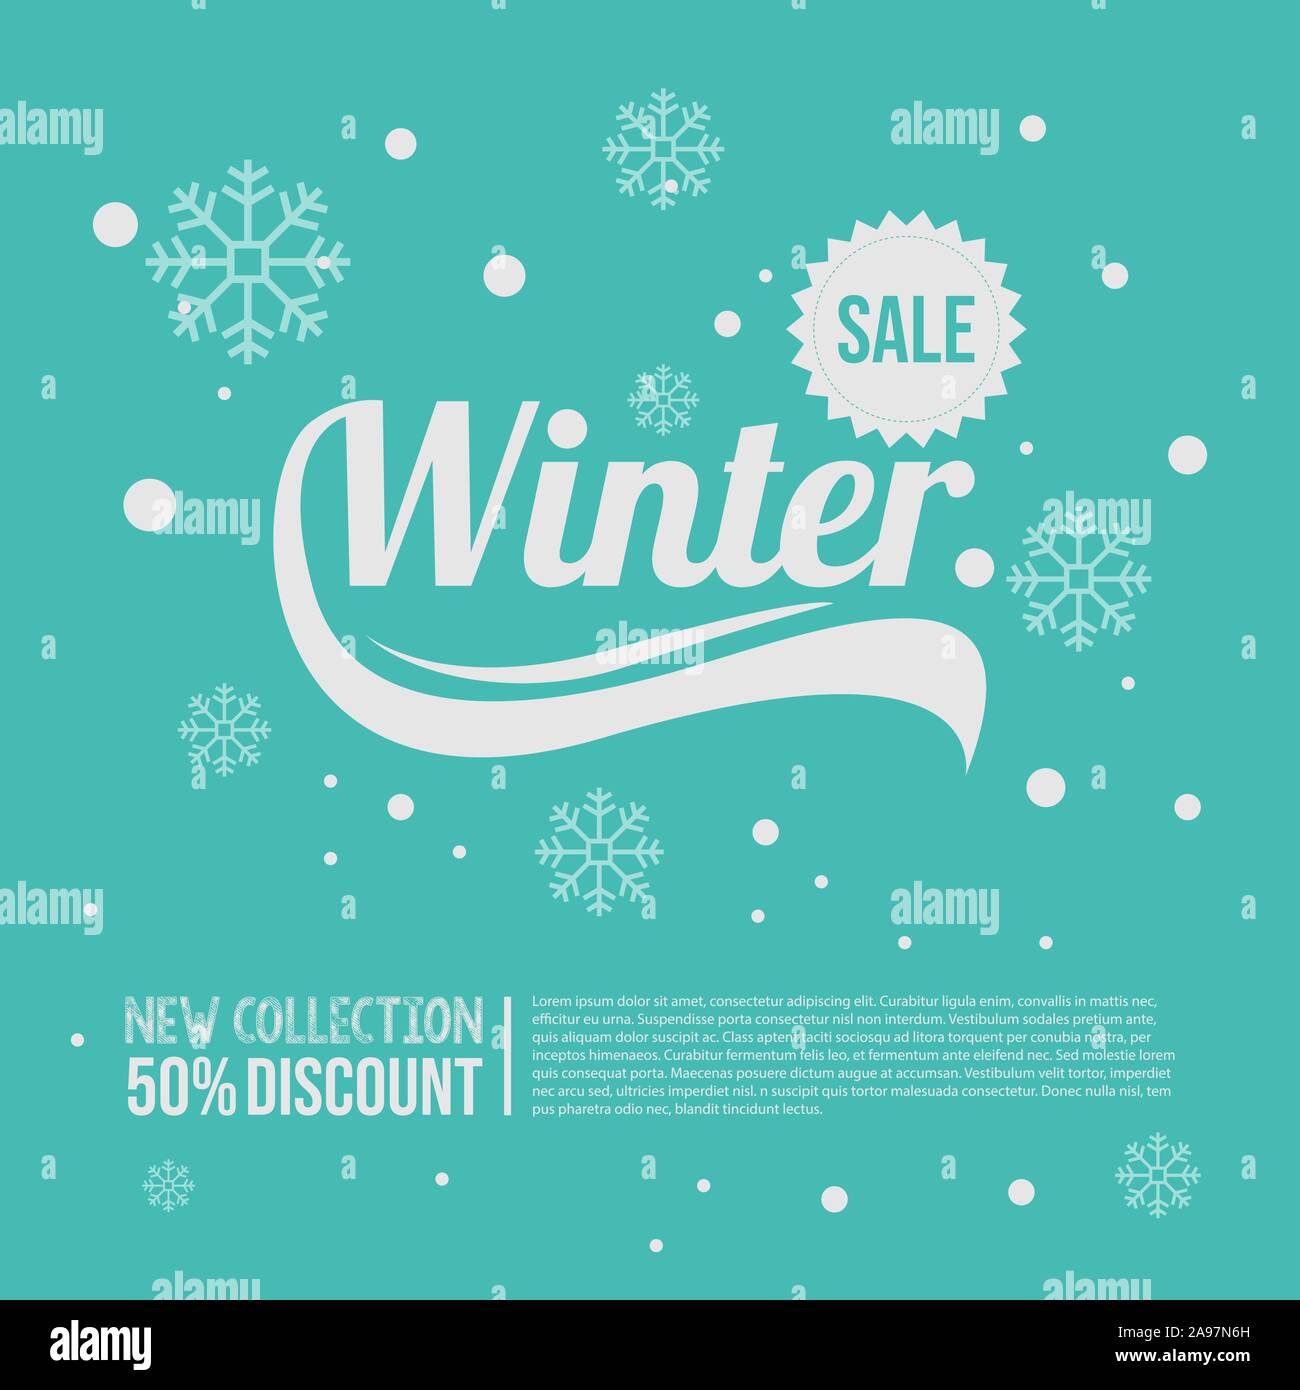 Winter sale vector banner design with white snowflakes elements and winter sale text in snow pattern background for shopping promotion. Vector illustr Stock Vector